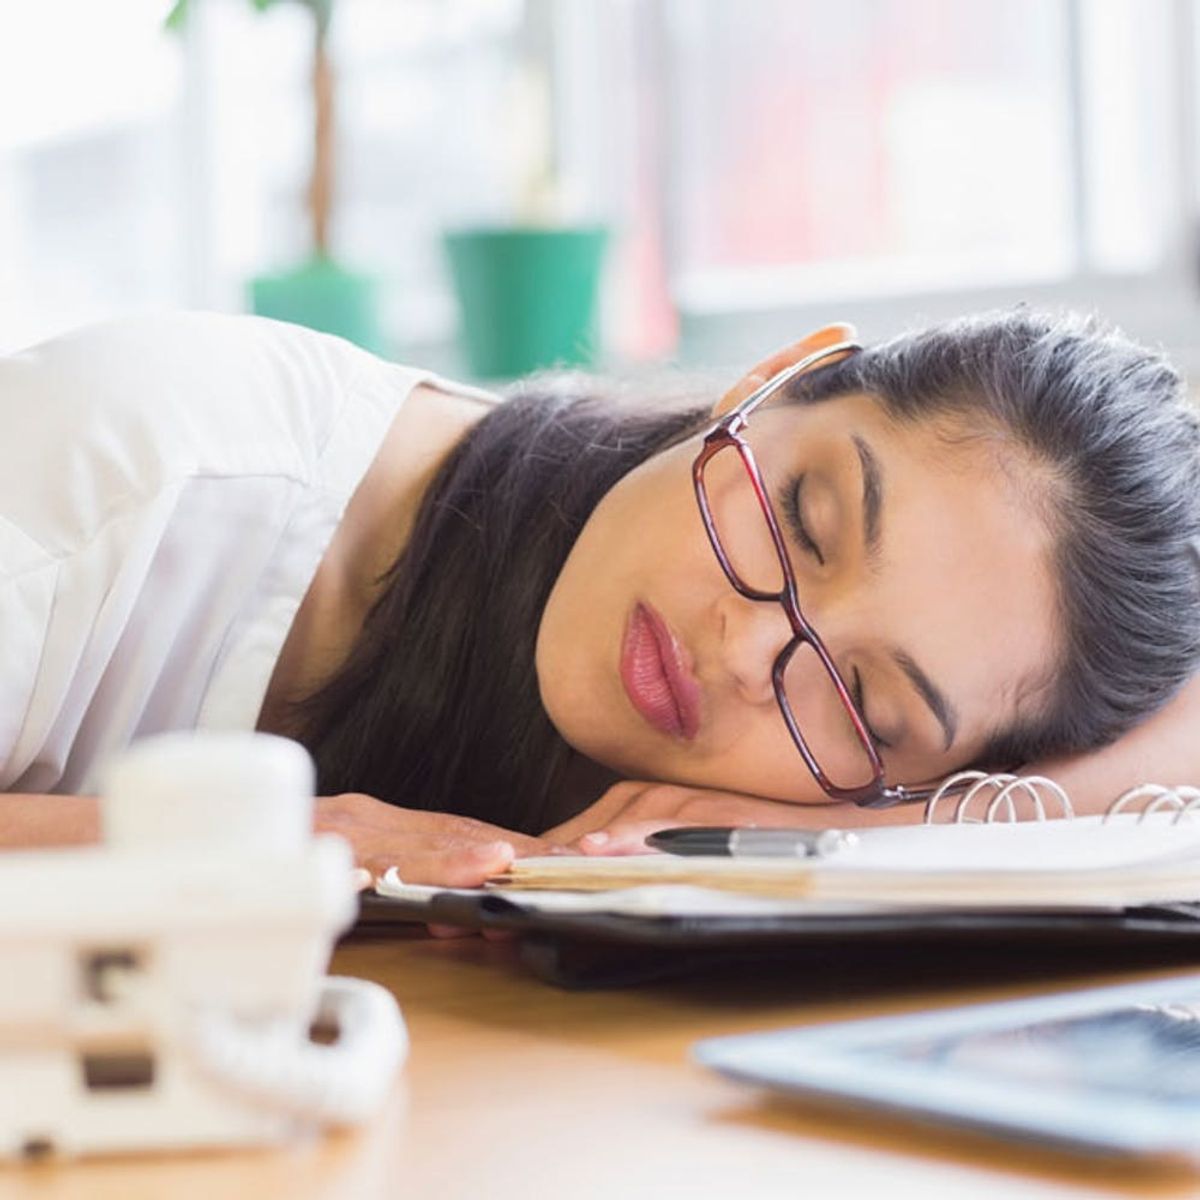 You Might Want to Think Twice Before You Take That Nap, Says Science